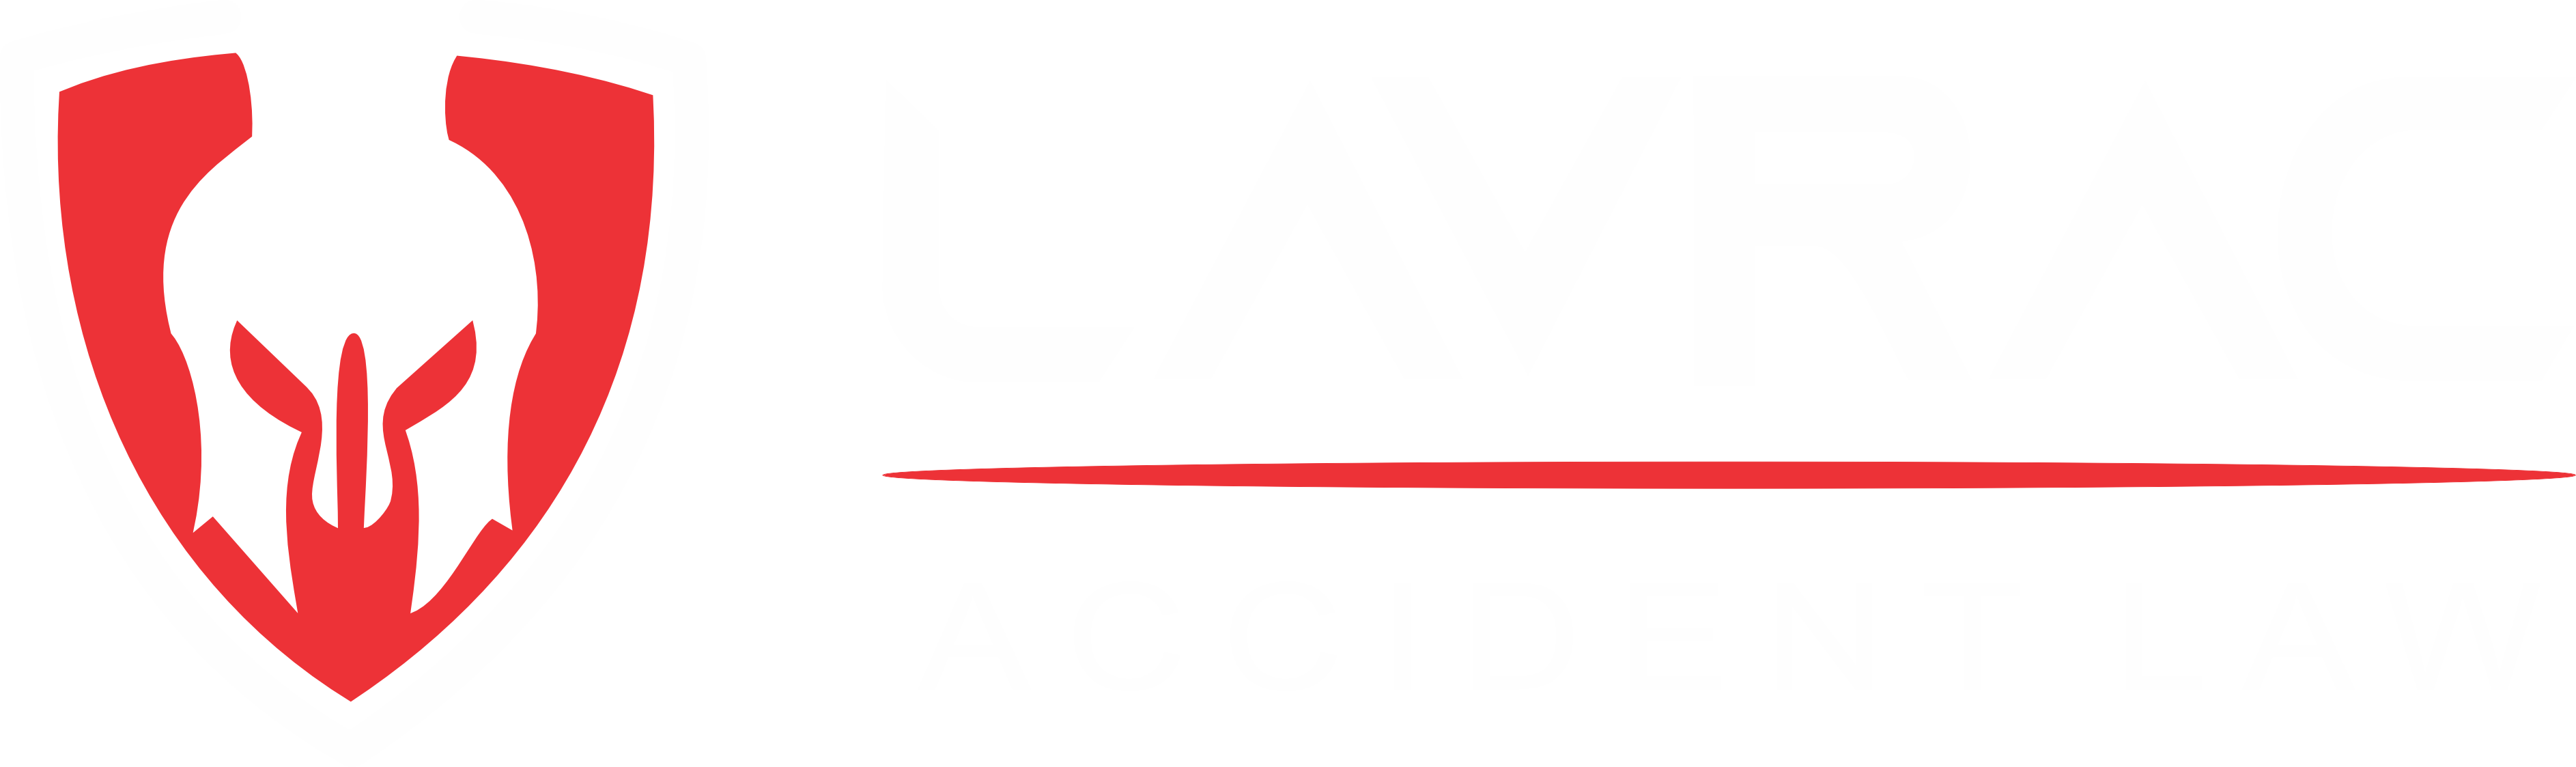 Lavrac Accident Law